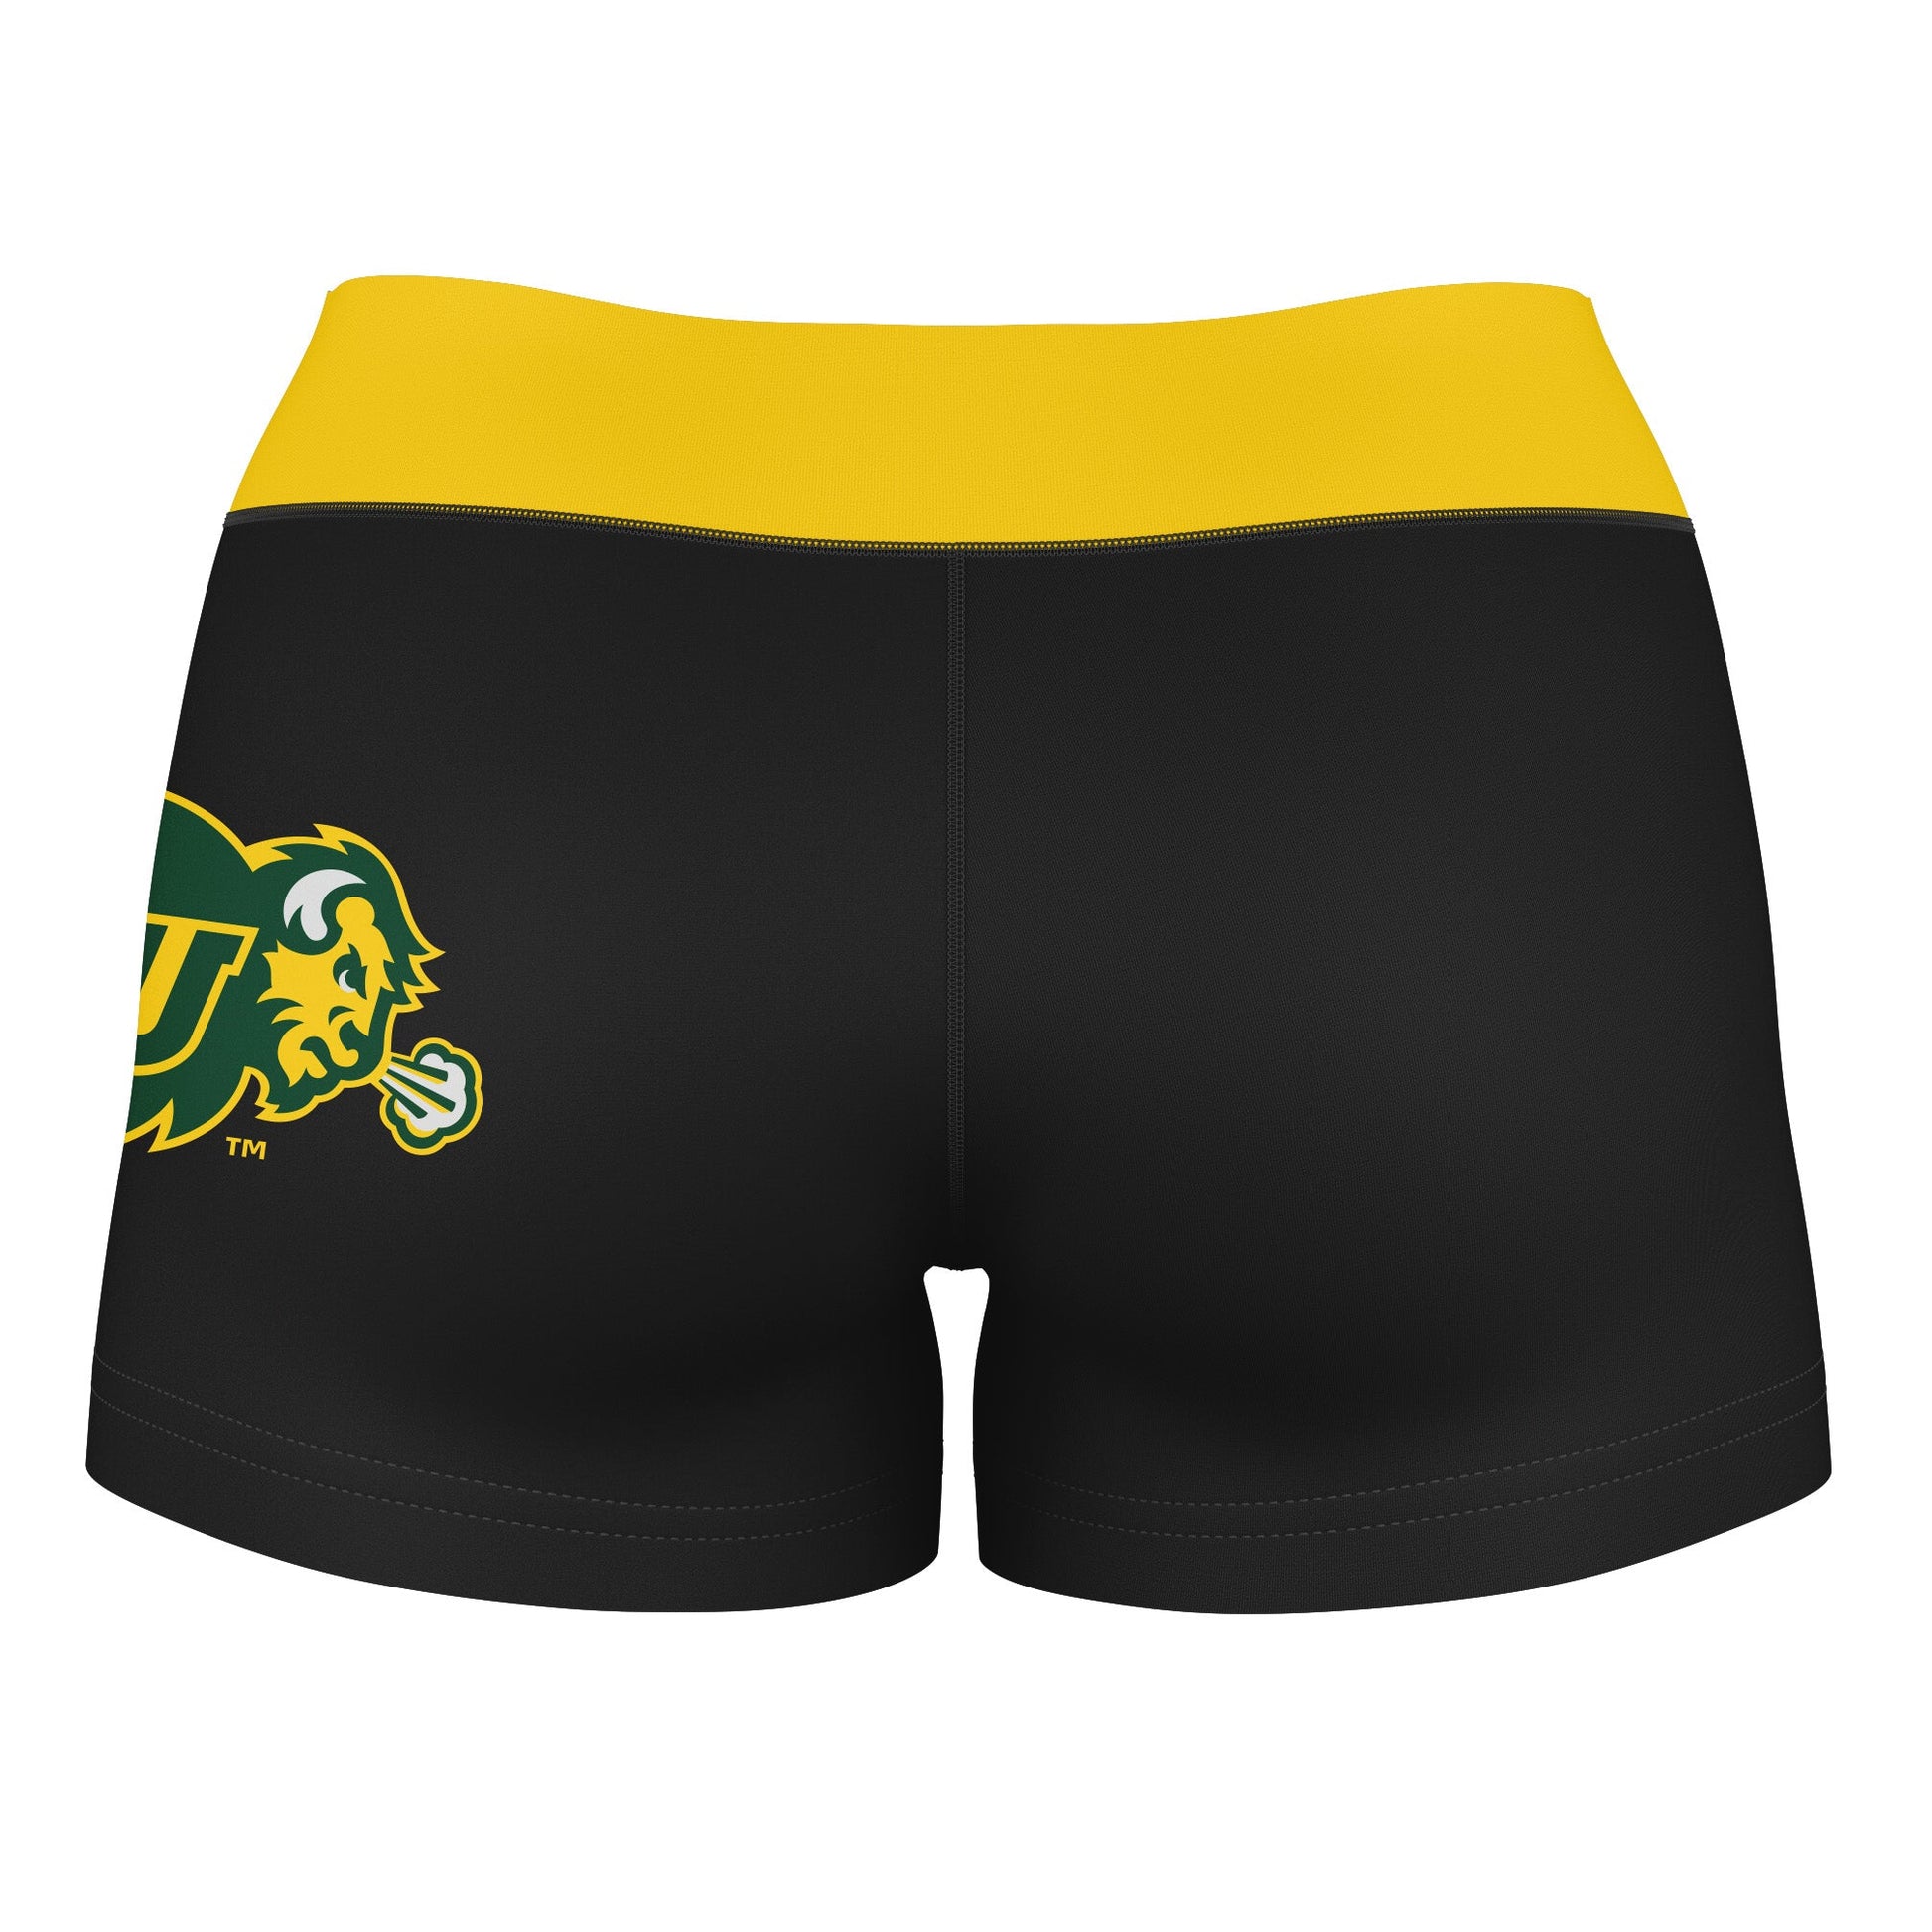 NDSU Bison Vive La Fete Game Day Logo on Thigh and Waistband Black and Gold Women Yoga Booty Workout Shorts 3.75 Inseam" - Vive La F̻te - Online Apparel Store